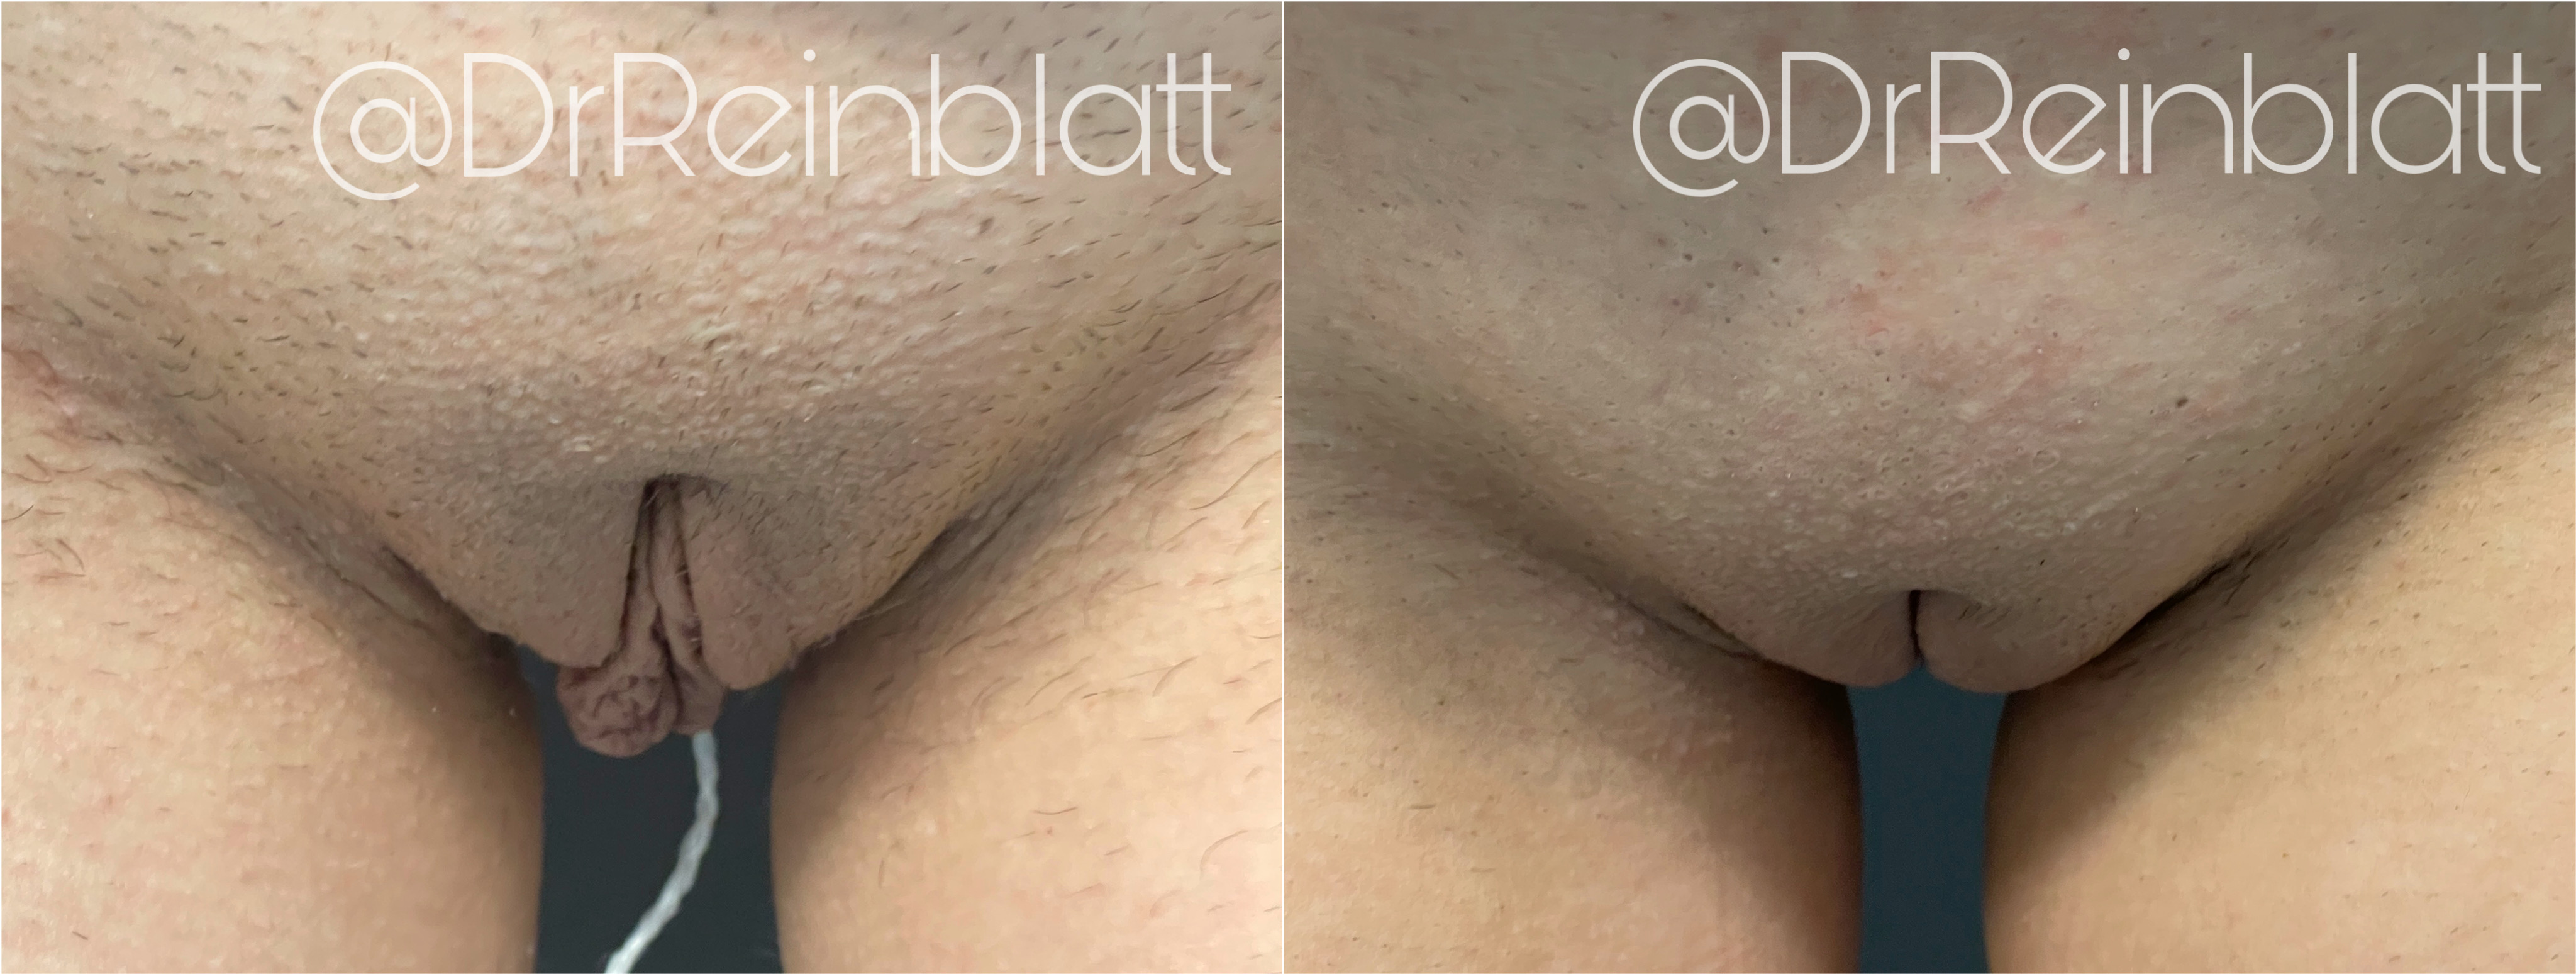 Labiaplasty Before and After | Dr. Maura Reinblatt